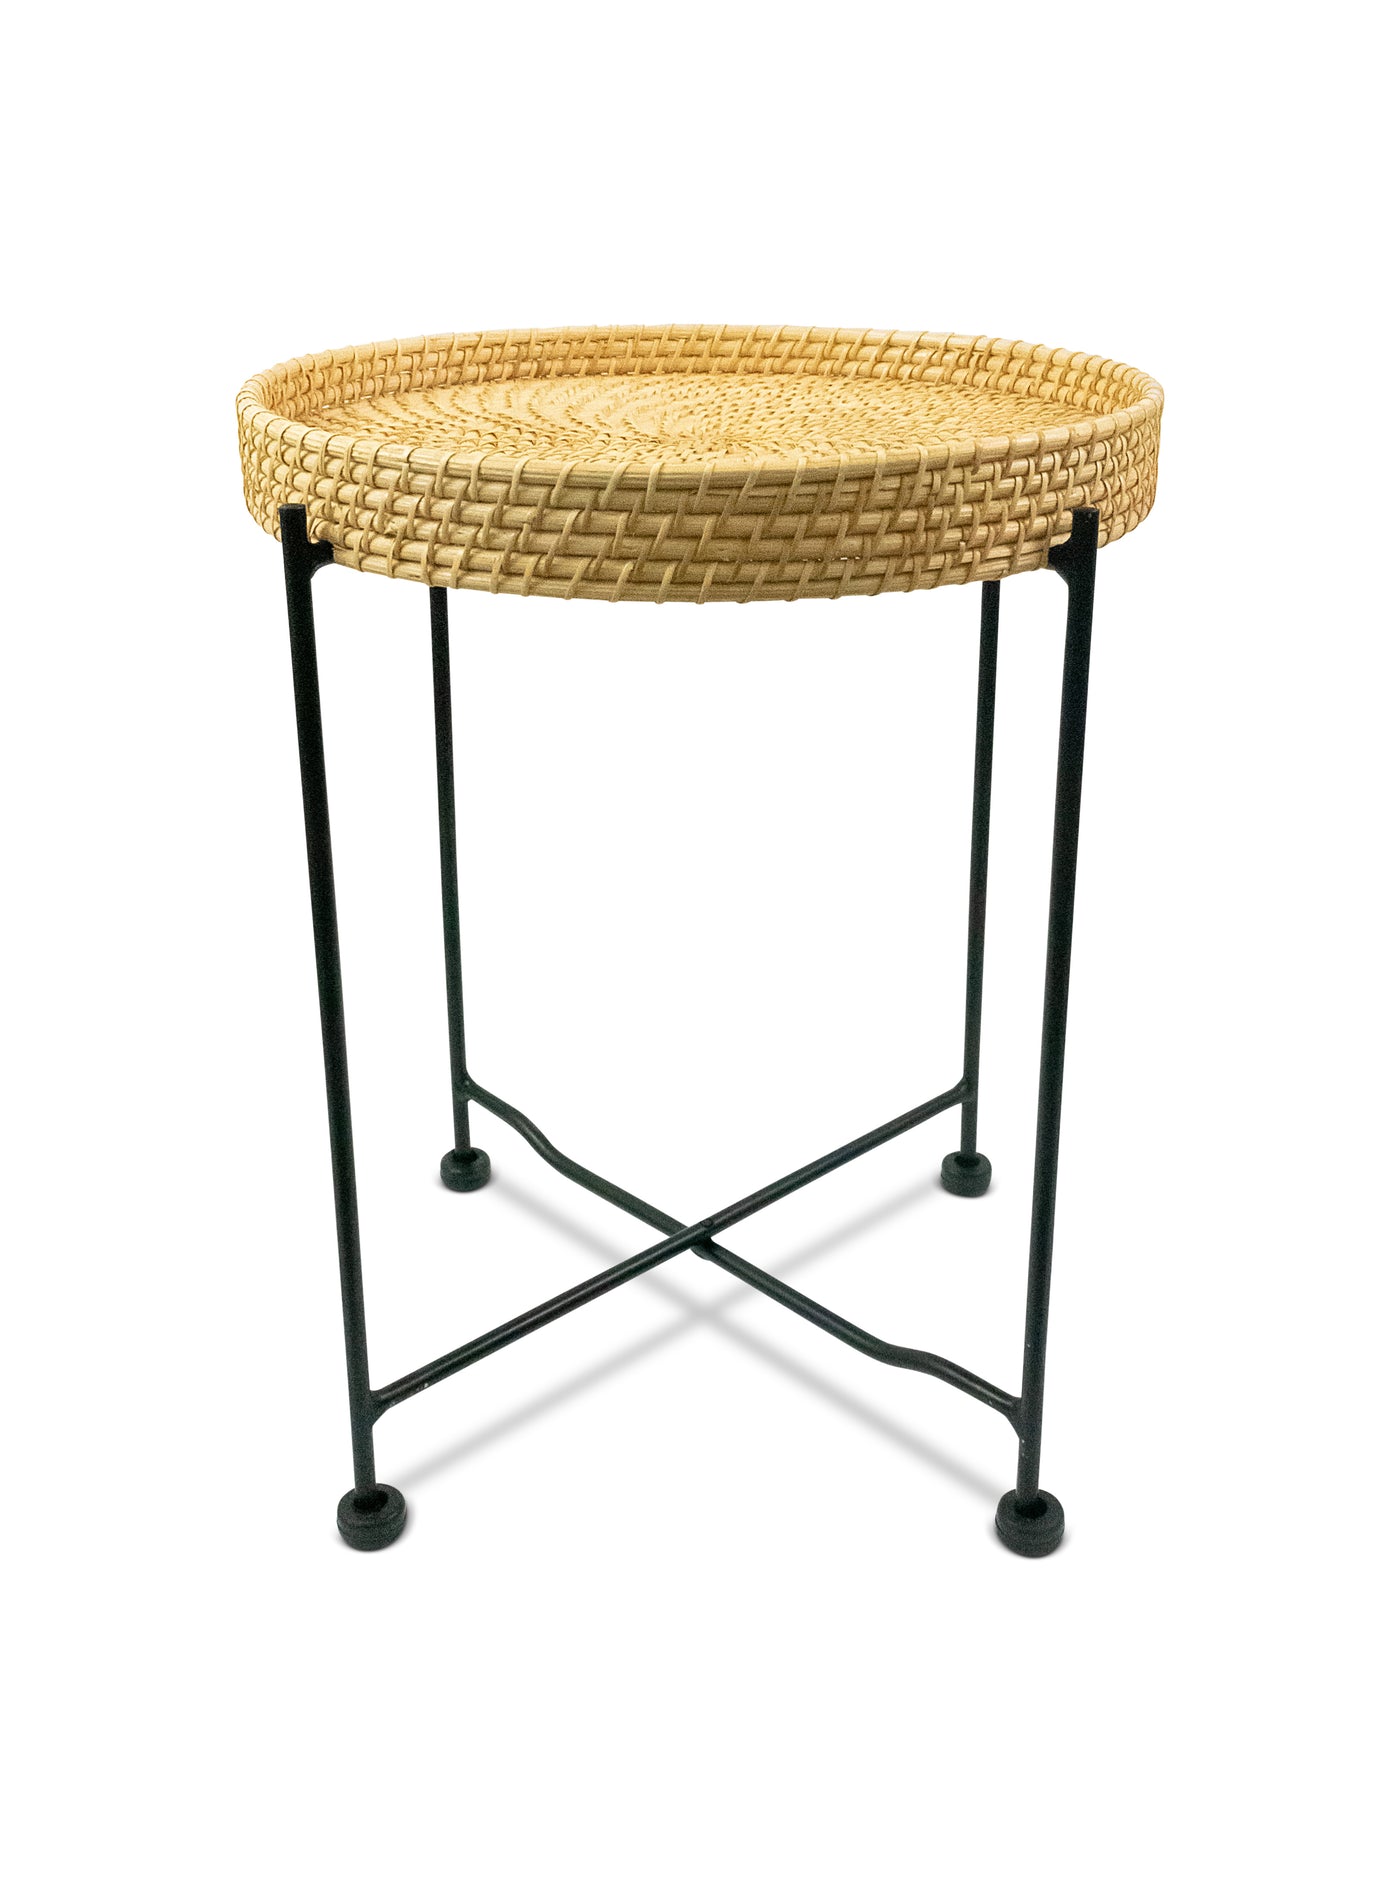 18" Hand Woven Rattan End Table Night Stand Accent Display Side Table Home Decor